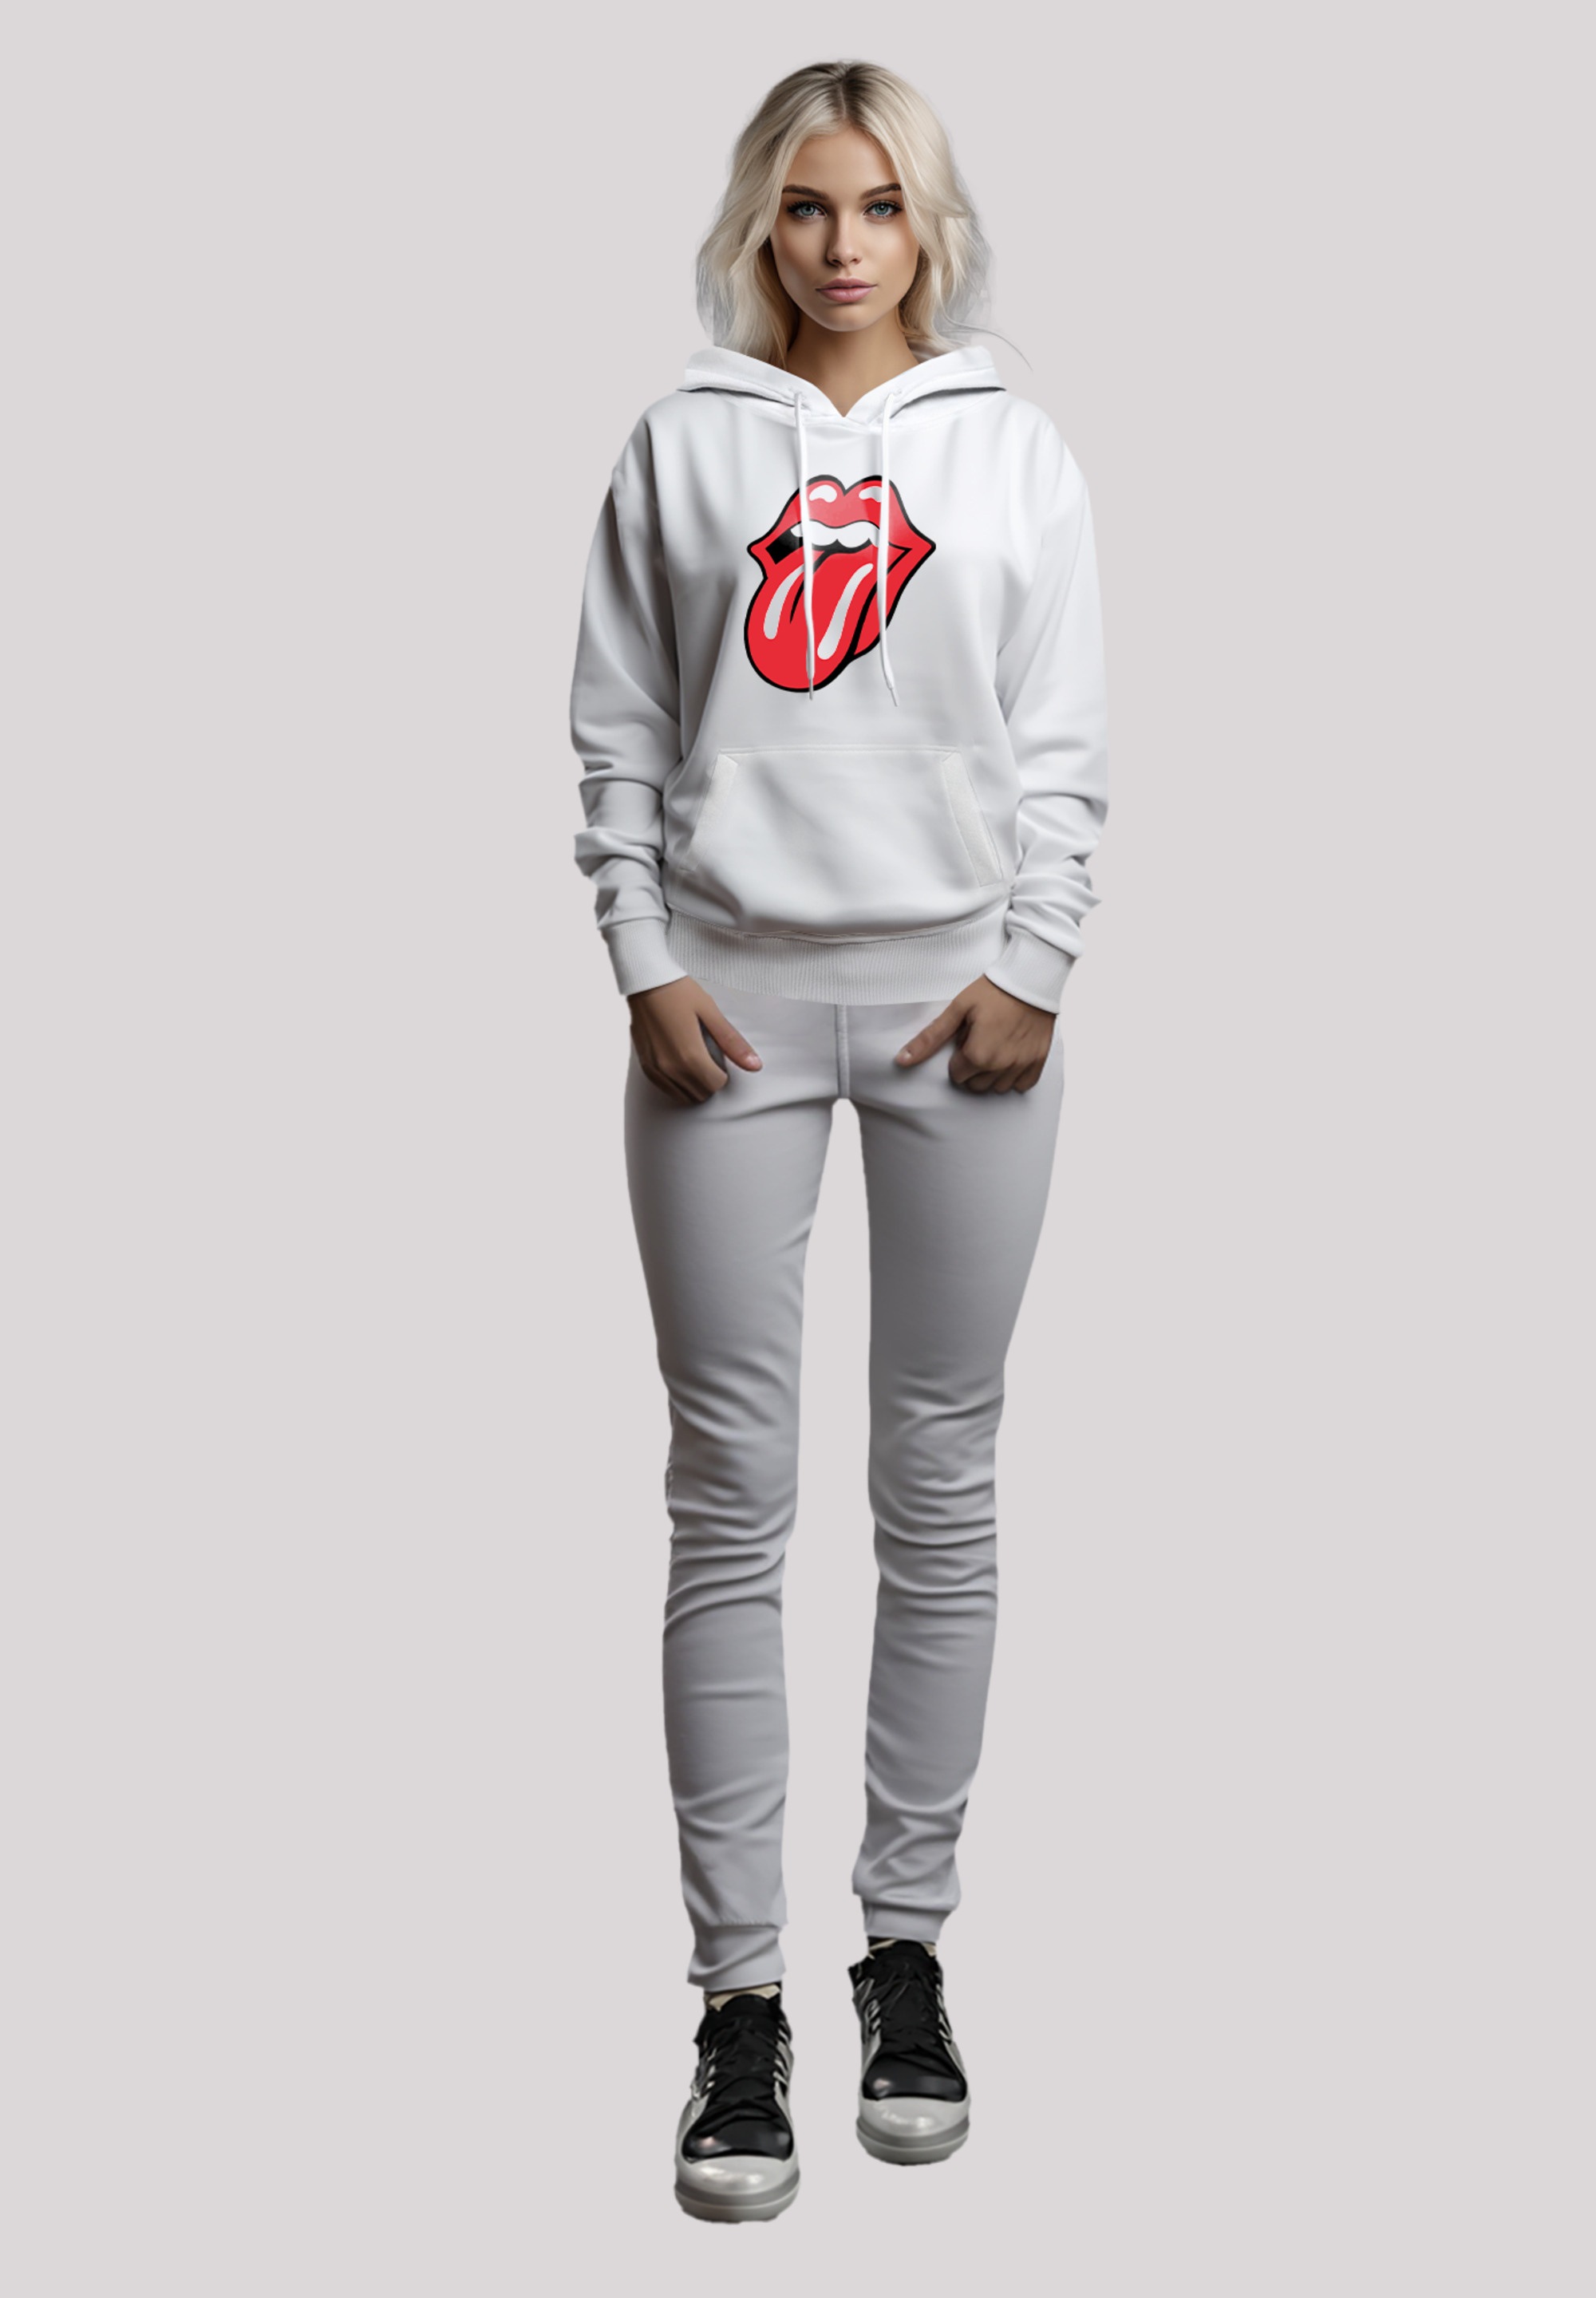 F4NT4STIC Kapuzenpullover »The Rolling Stones Classic Zunge Rock Musik  Band«, Hoodie, Warm, Bequem | I'm walking